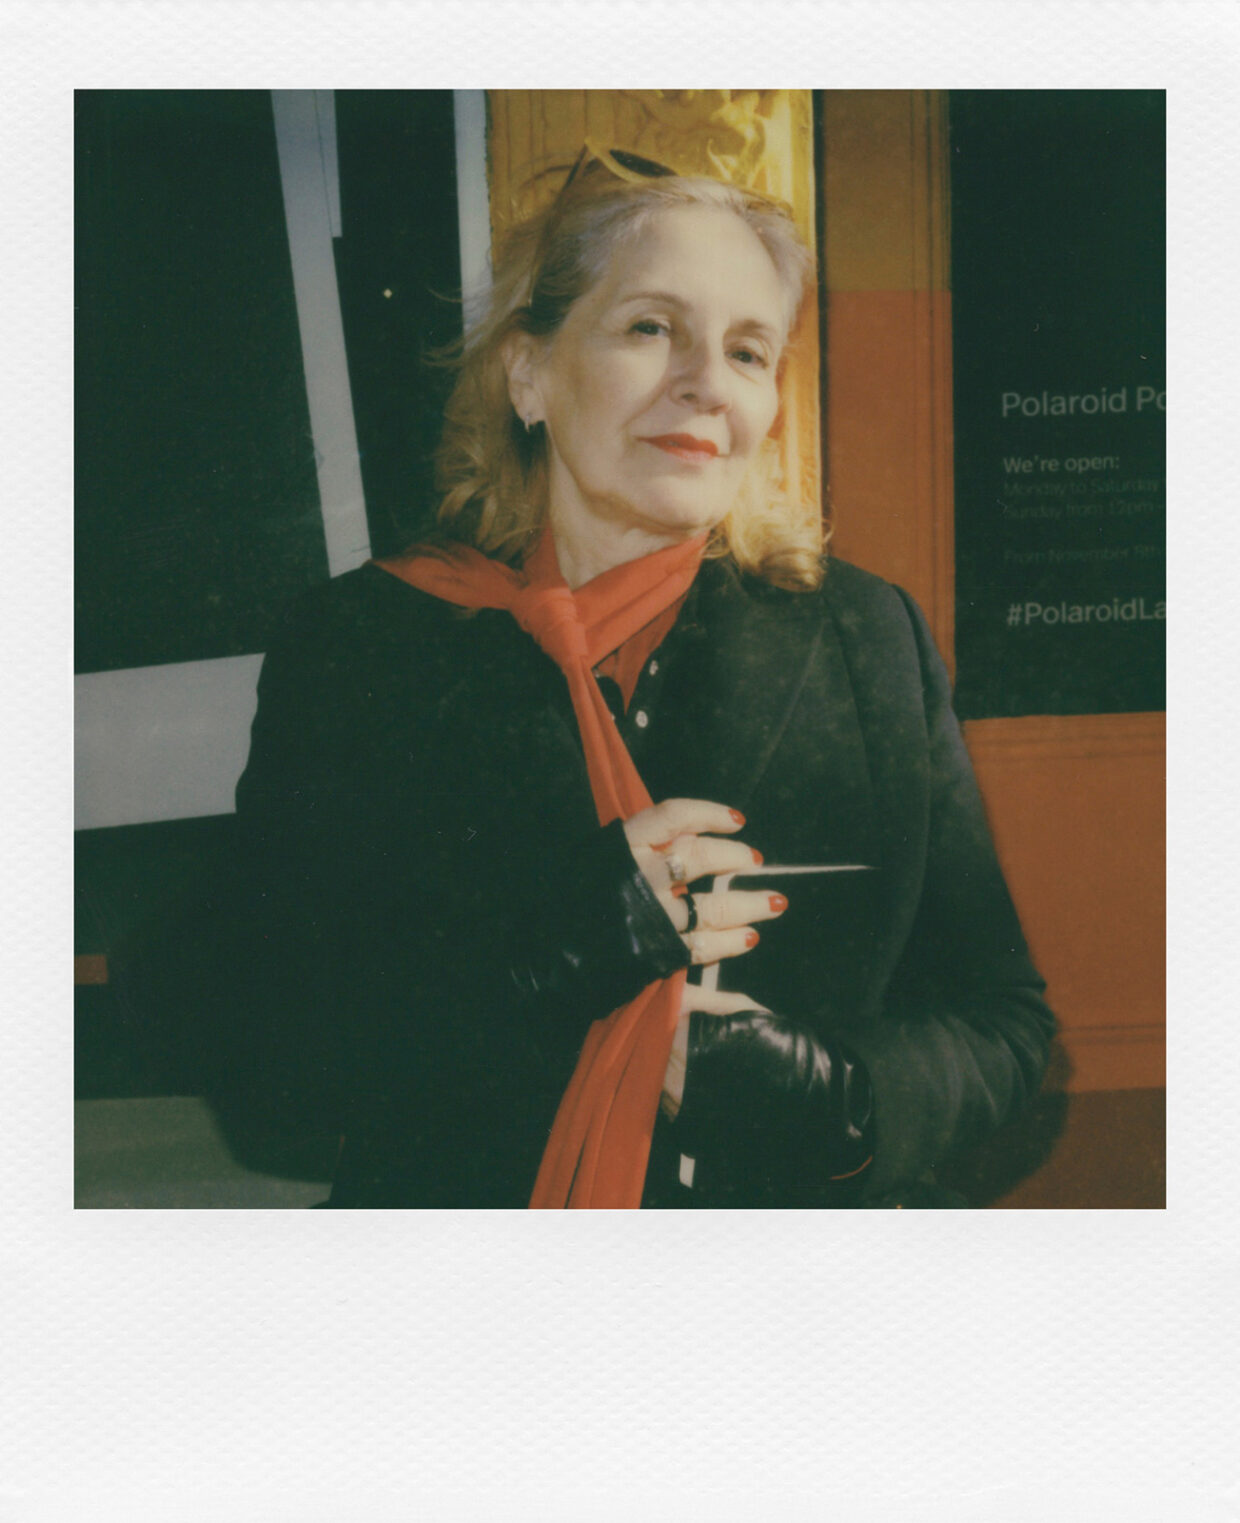 Maripol, godmother of instant photography, on the serendipitous magic of Polaroids | 2